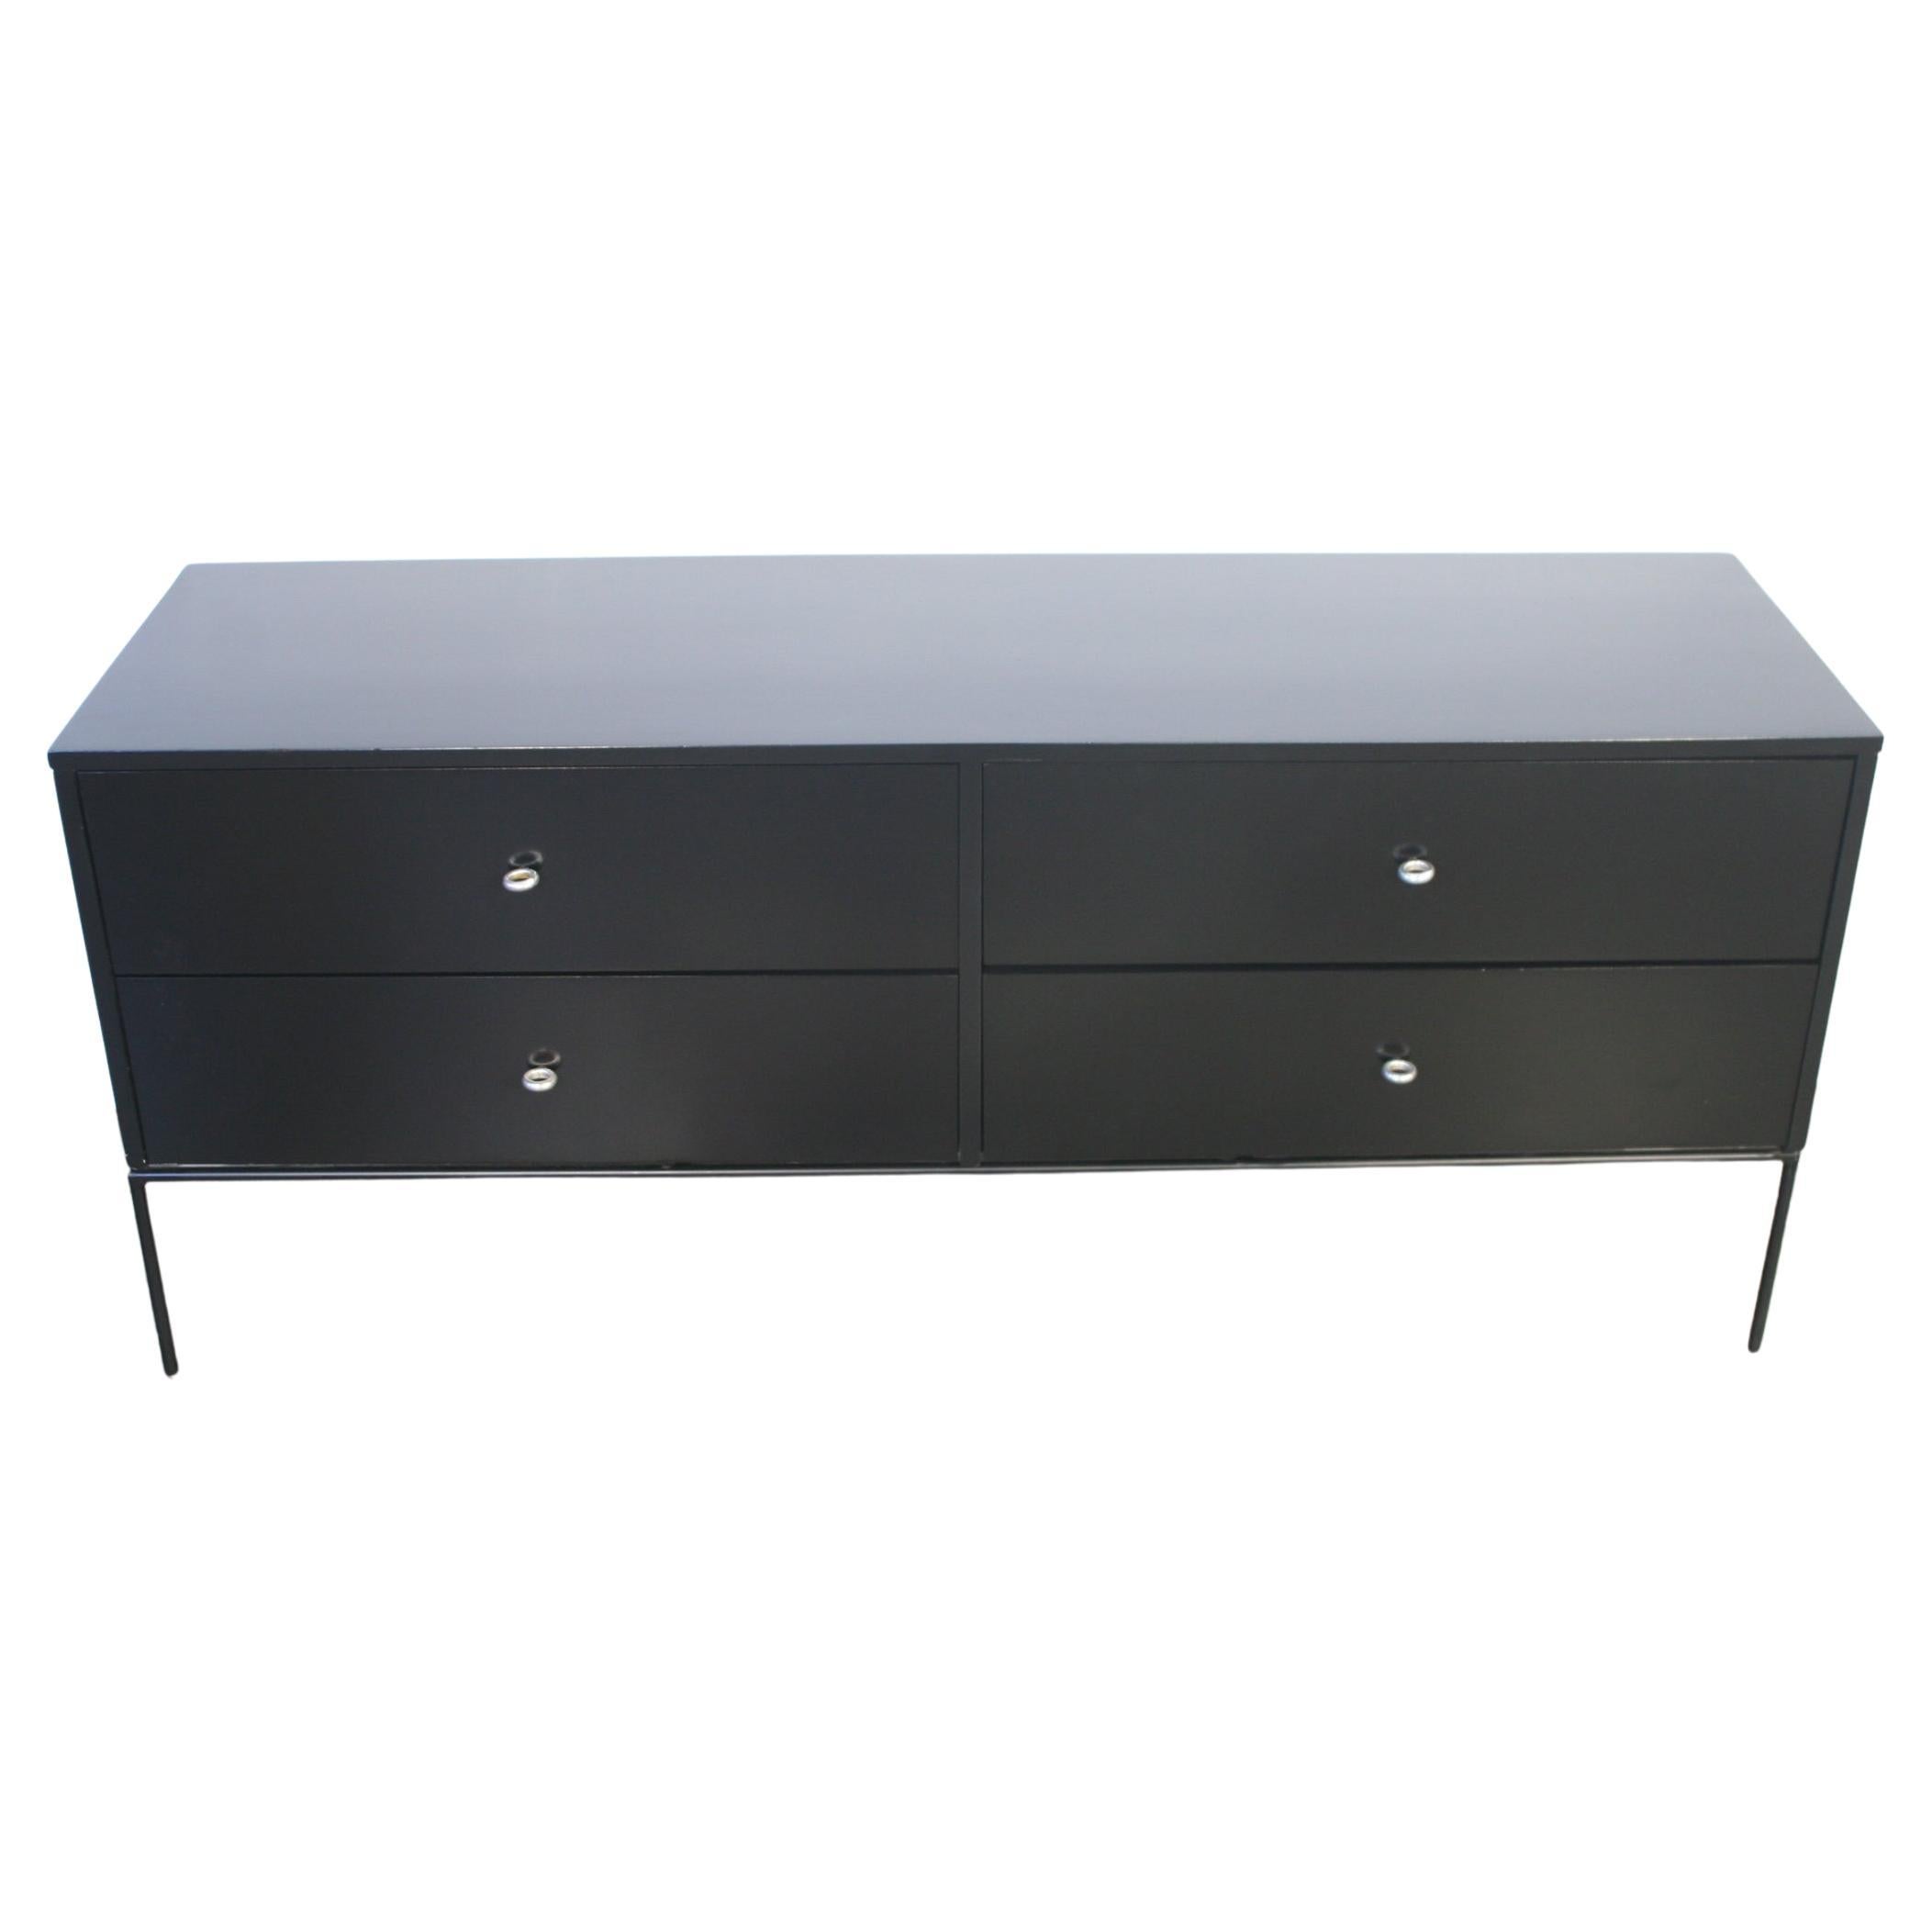 American Midcentury Low 4 Drawer Dresser by Paul McCobb Planner Group #1504 All Black For Sale